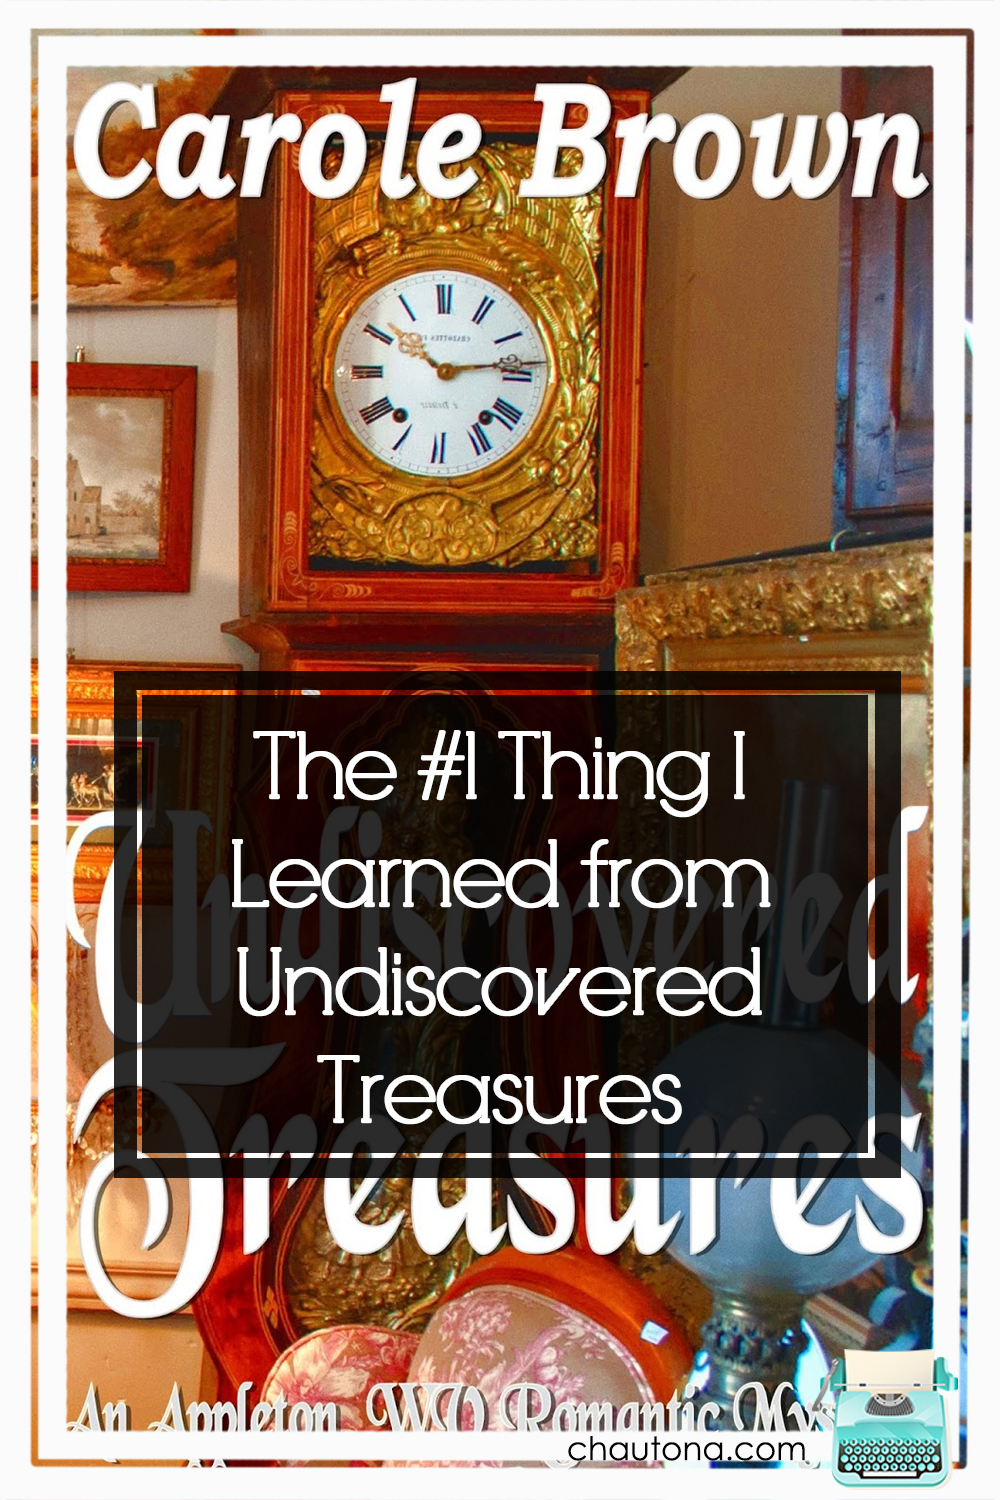 The #1 Thing I Learned from Undiscovered Treasures